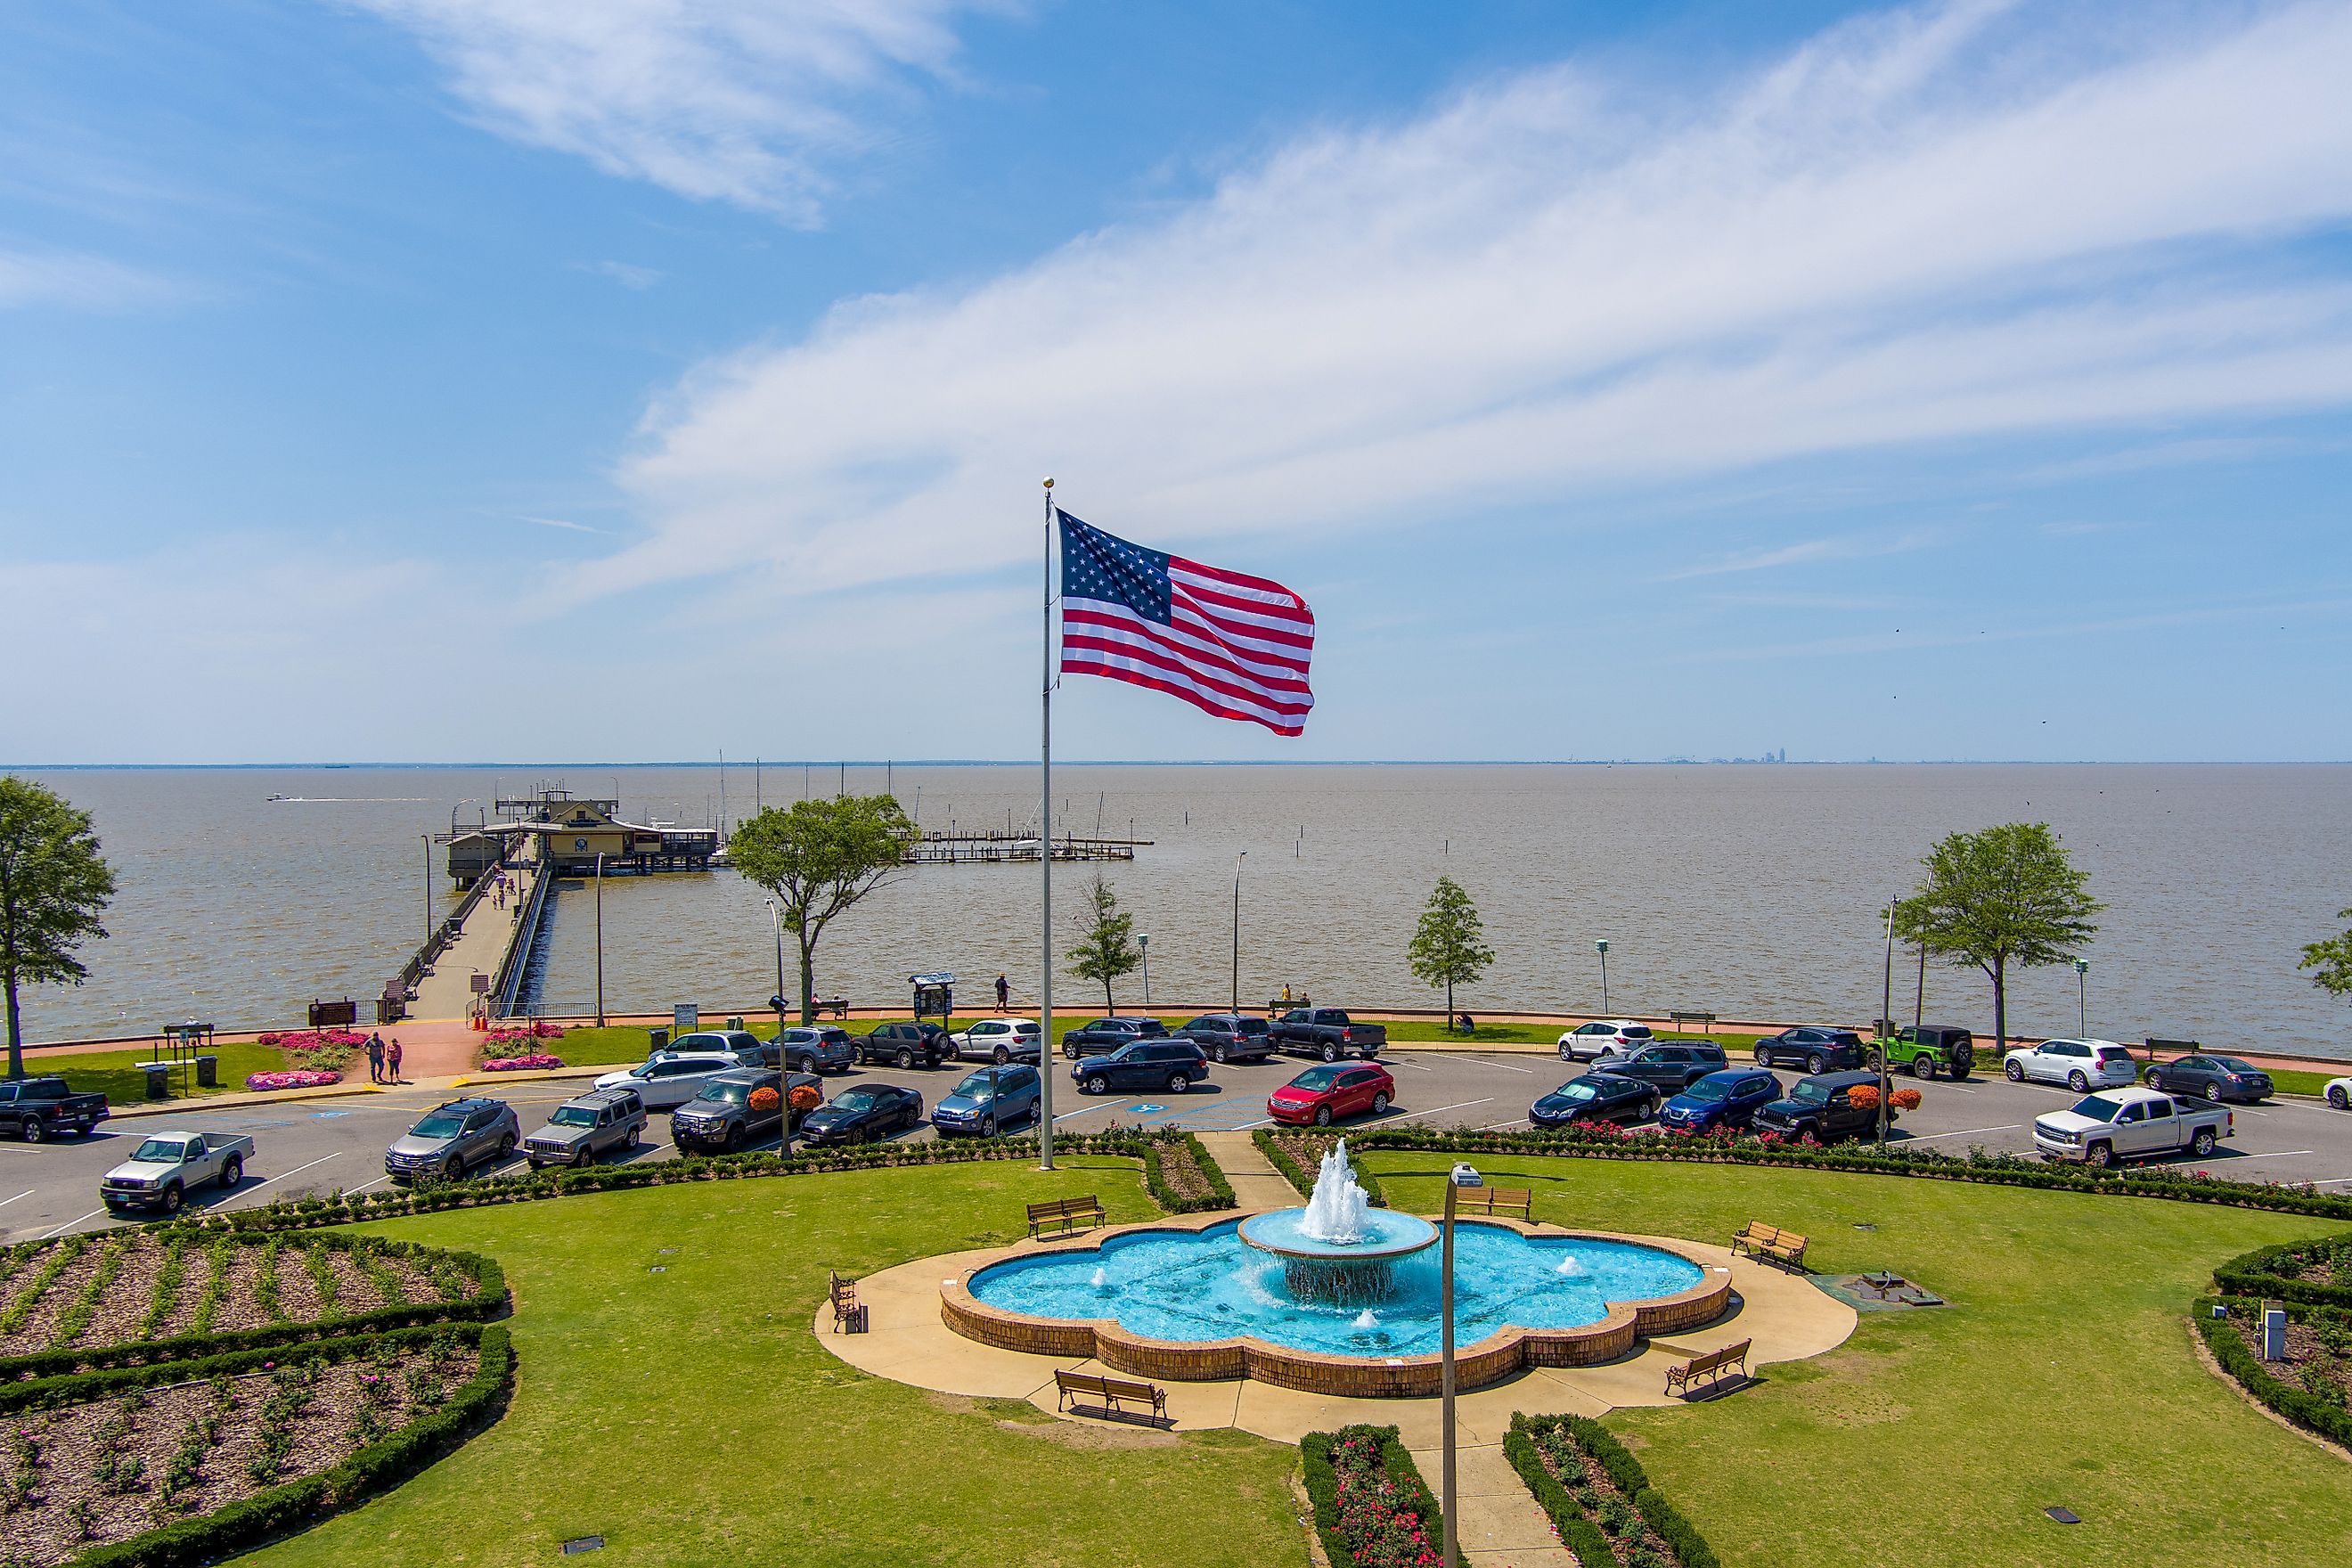 The town of Fairhope in Alabama.